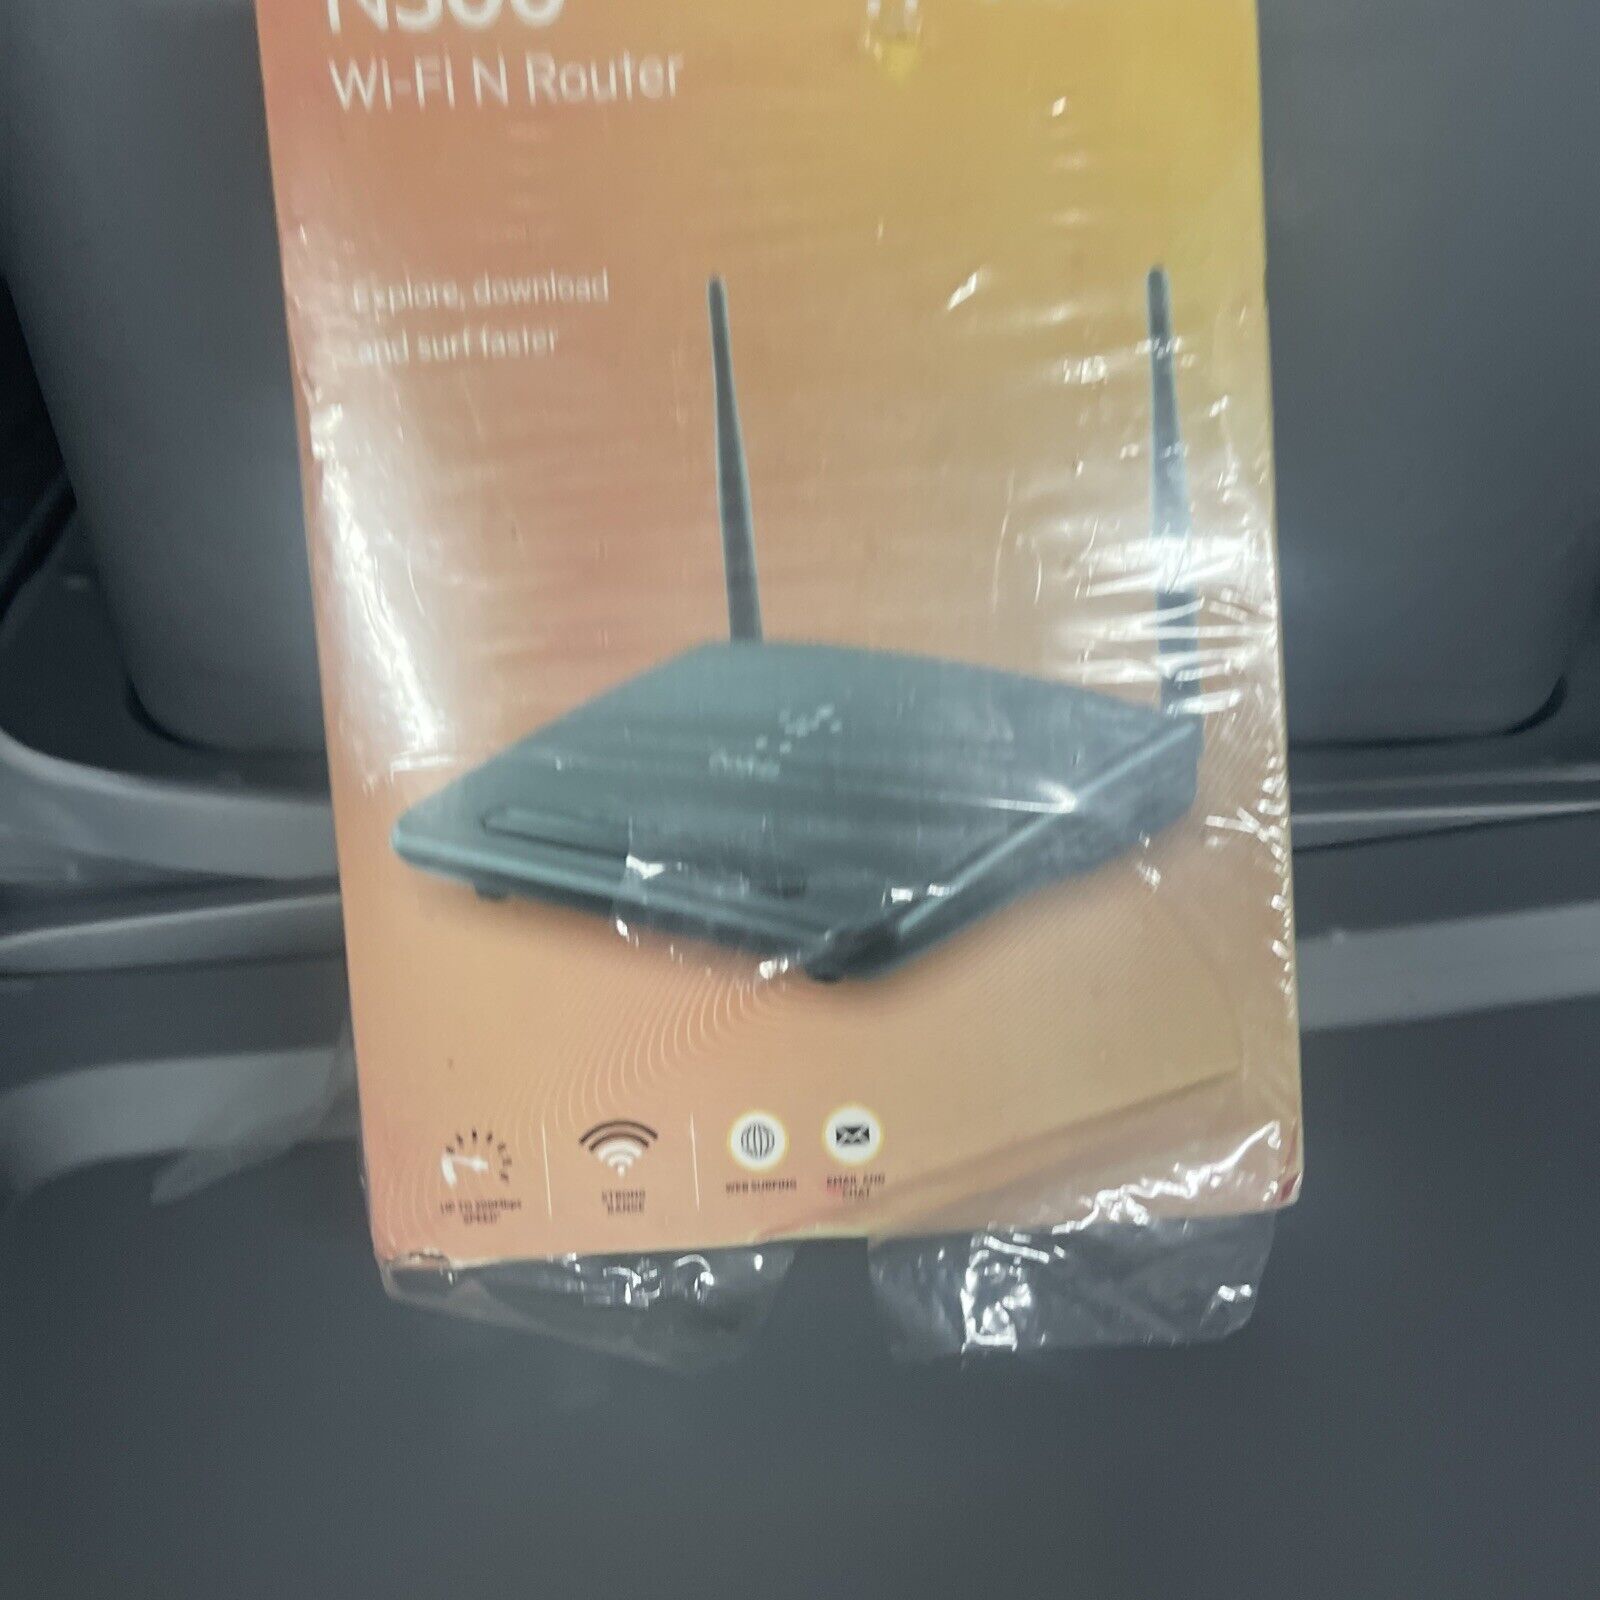 NEW Belkin F9K1010 300Mbps Wireless WiFi N300 4-Port Router with 2 Antennas